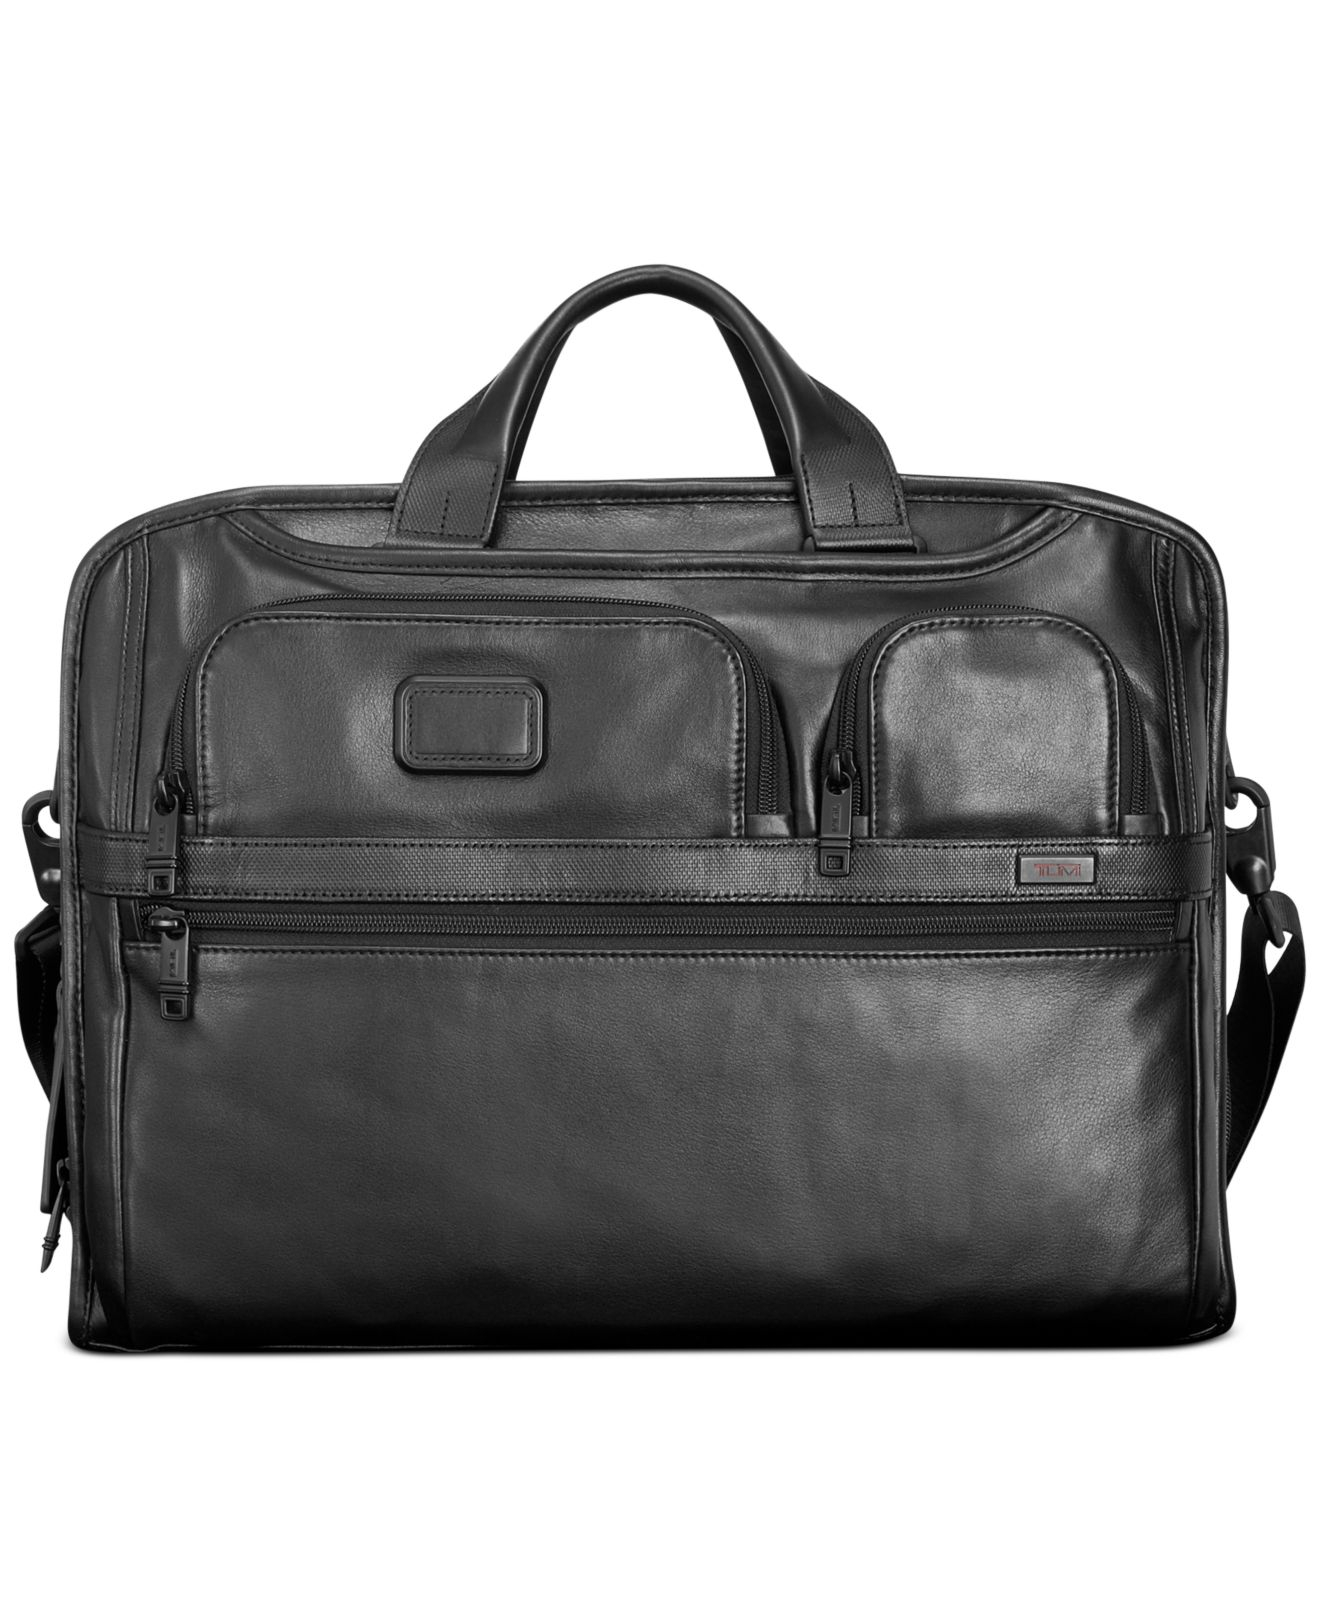 Lyst - Tumi Alpha 2 Leather Compact Laptop Briefcase in Black for Men